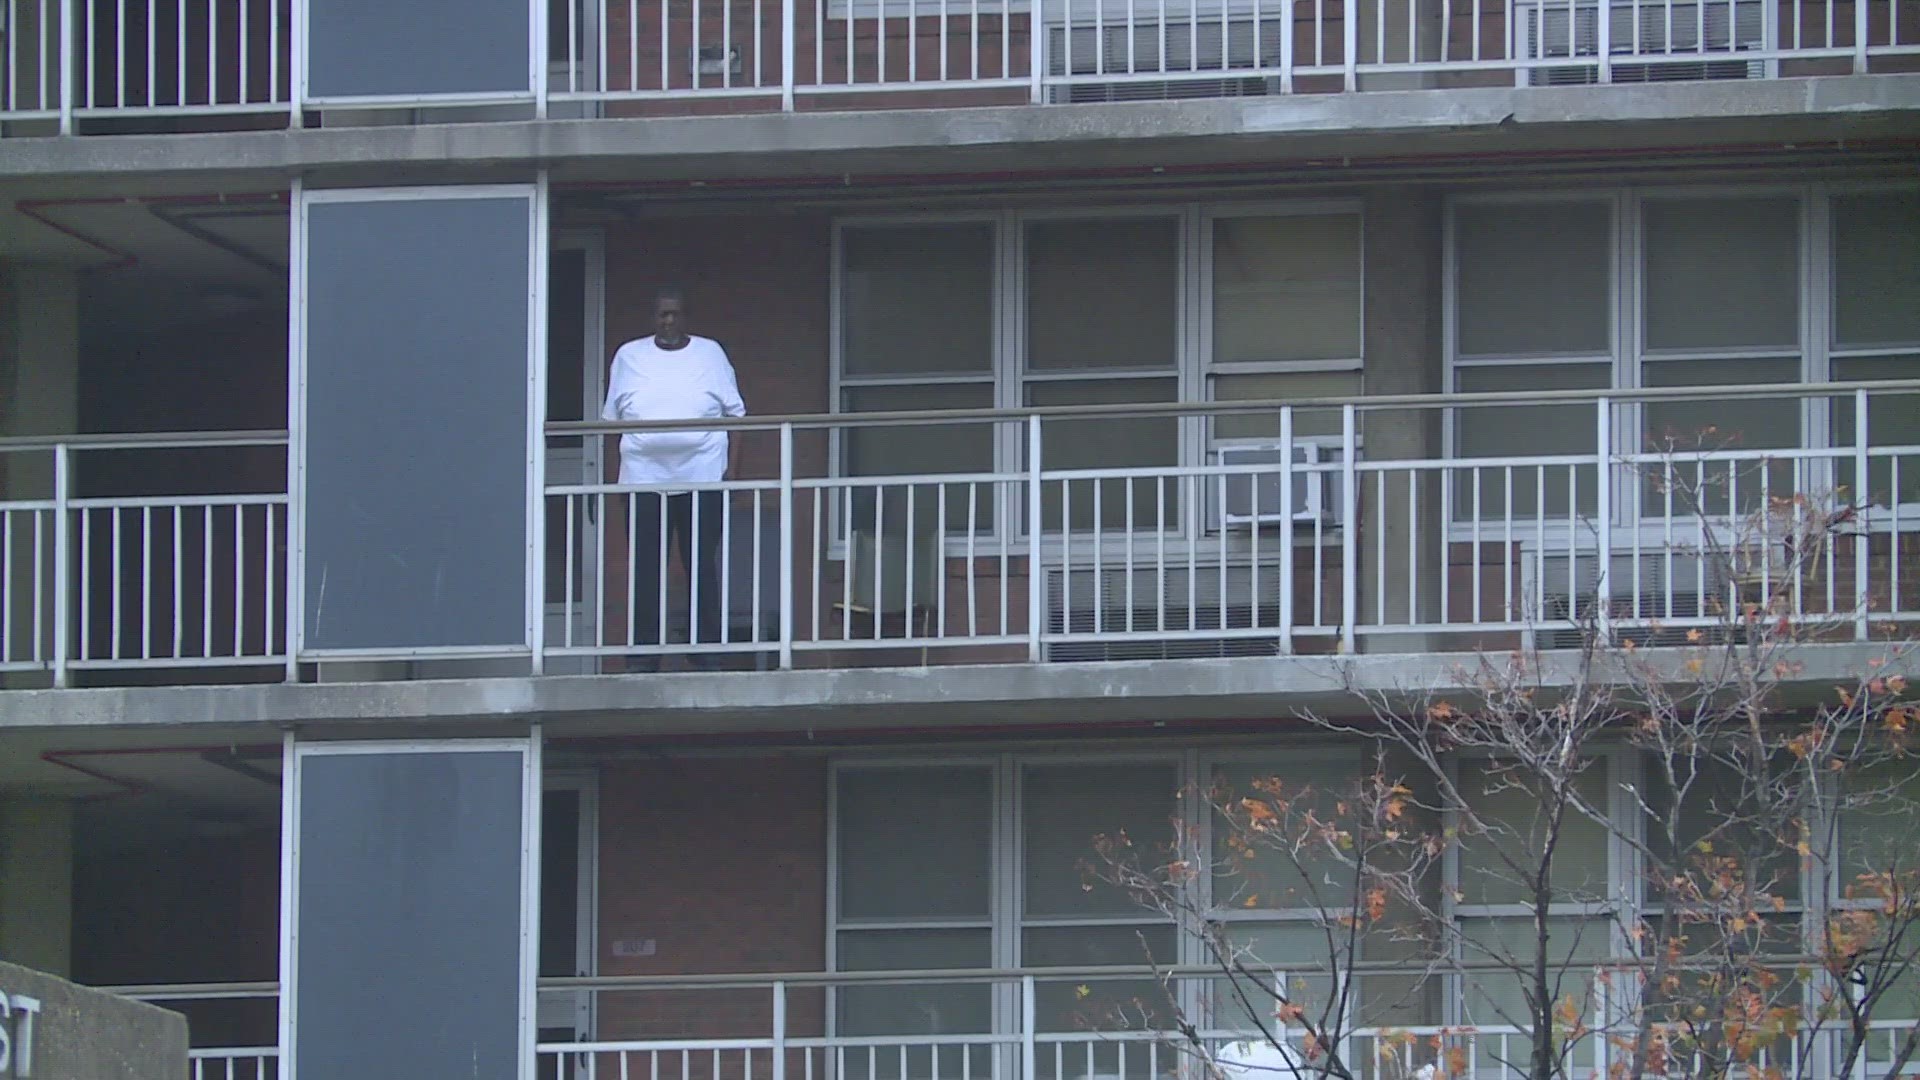 The residents are hoping to have a task force created to address some of the issues they are facing living in the complex near downtown Louisville.